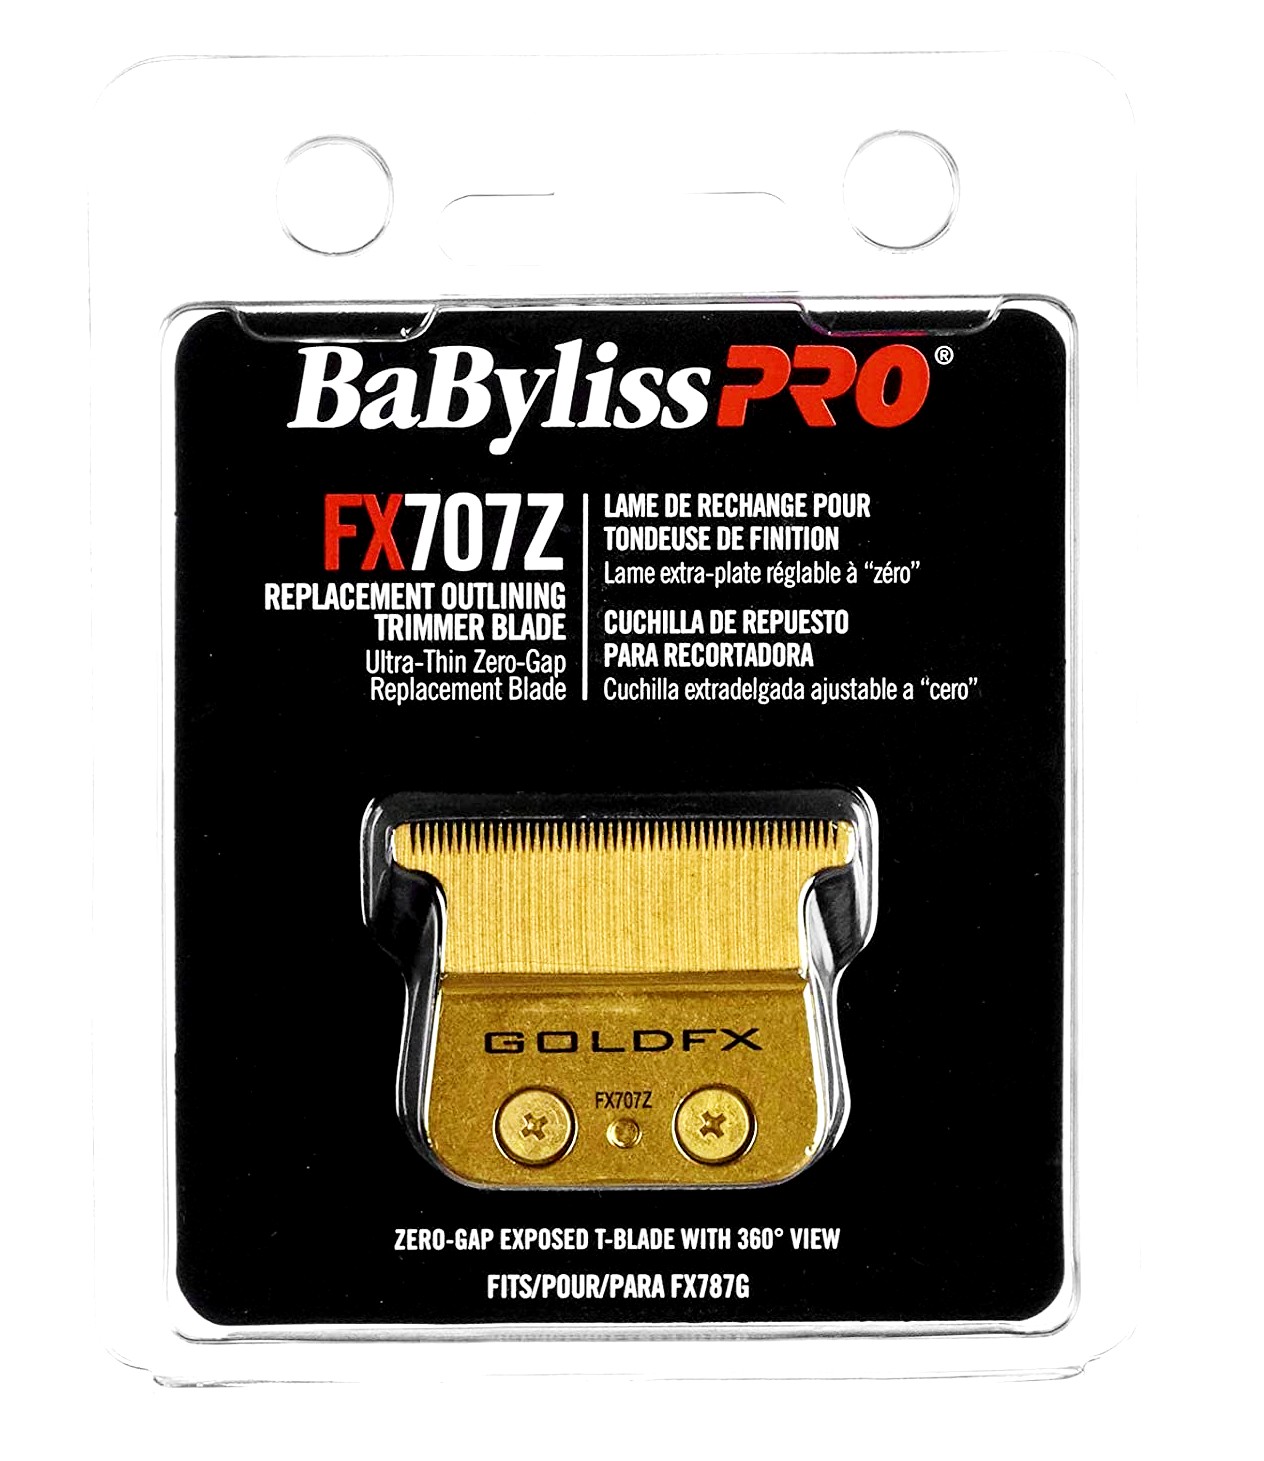 BaBylissPRO Deep Tooth Gold Trimmer Replacement Blade